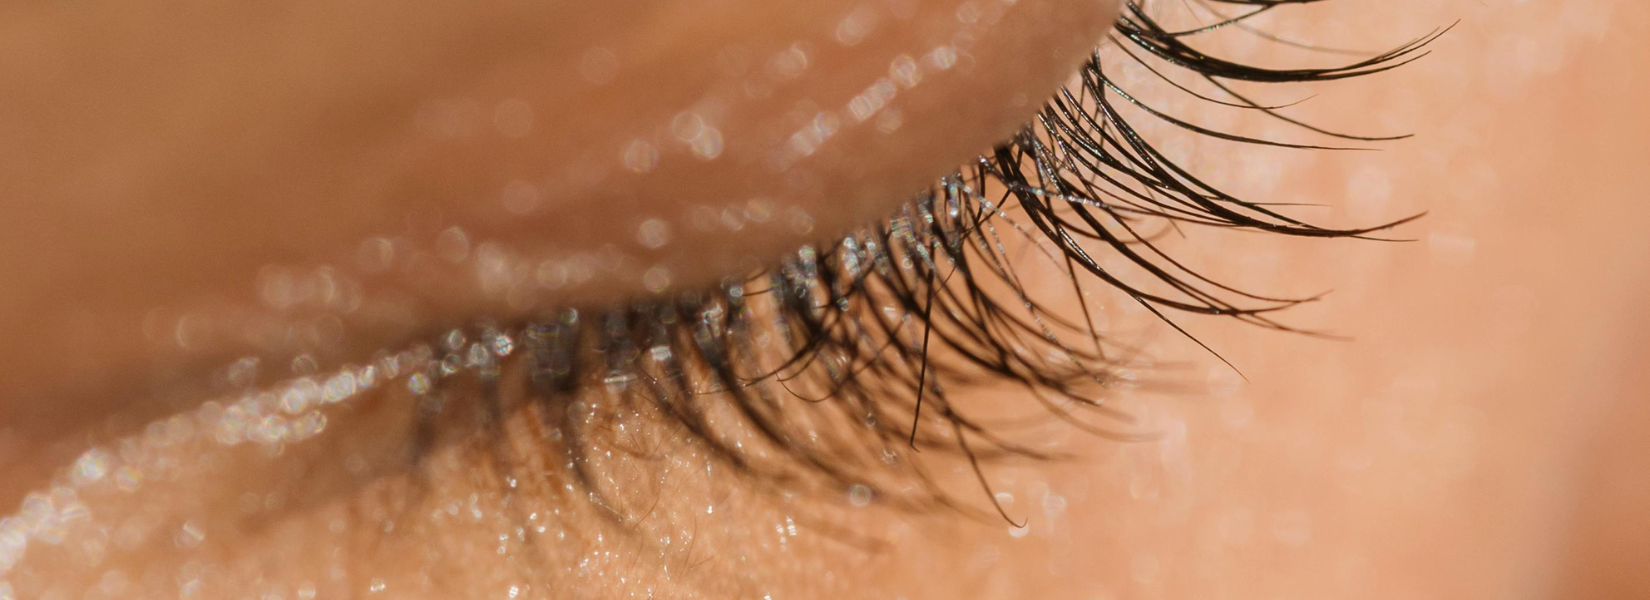 Do Lash Serums Really Work? With Before & After Photos